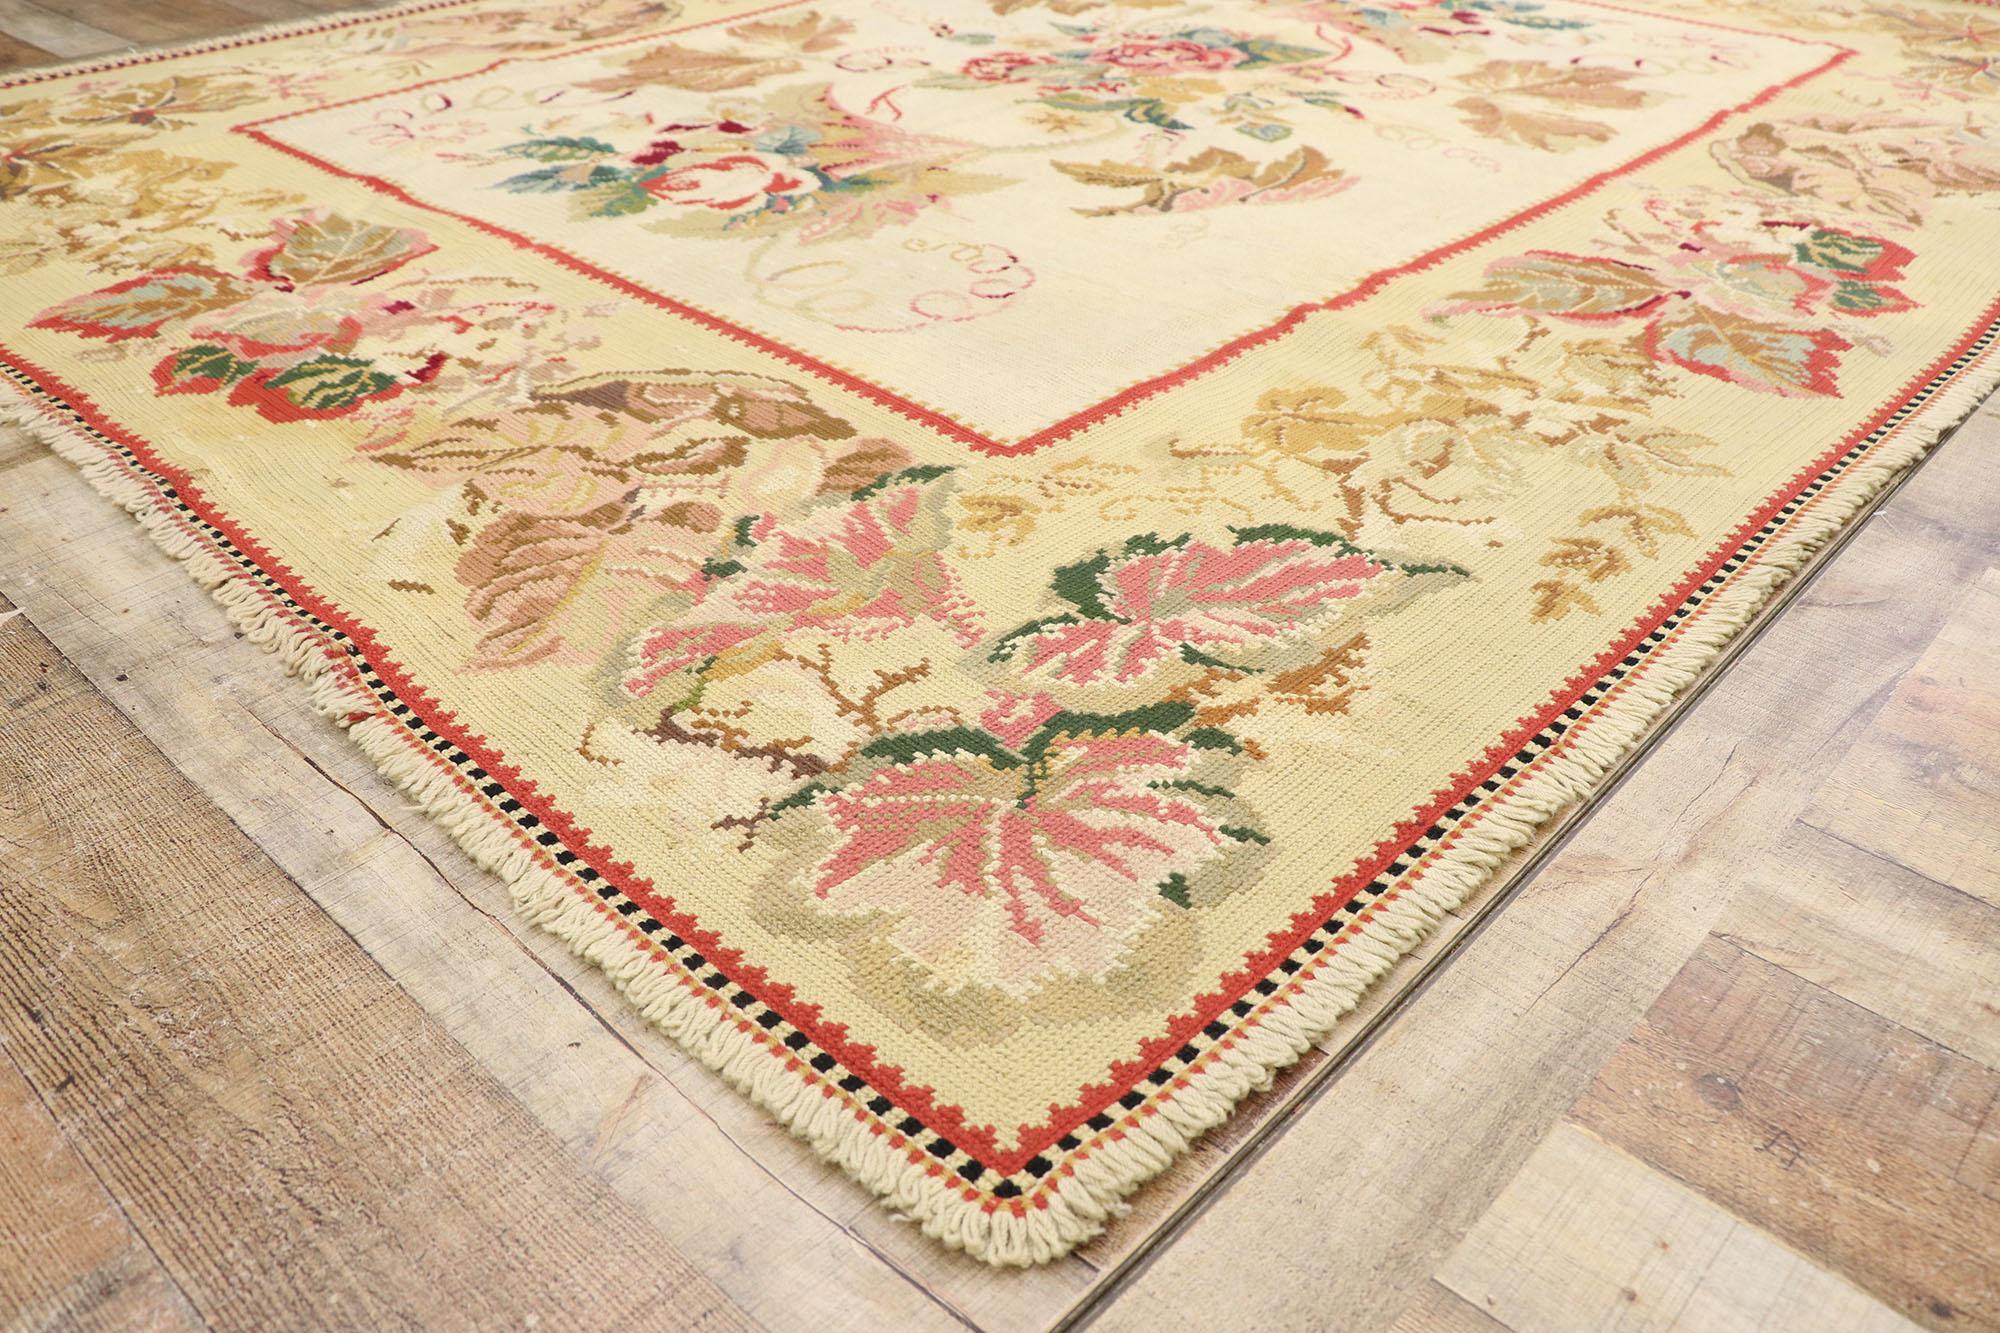 French Provincial Antique Portuguese Arraiolos Needlepoint Rug with Romantic French Country Style For Sale